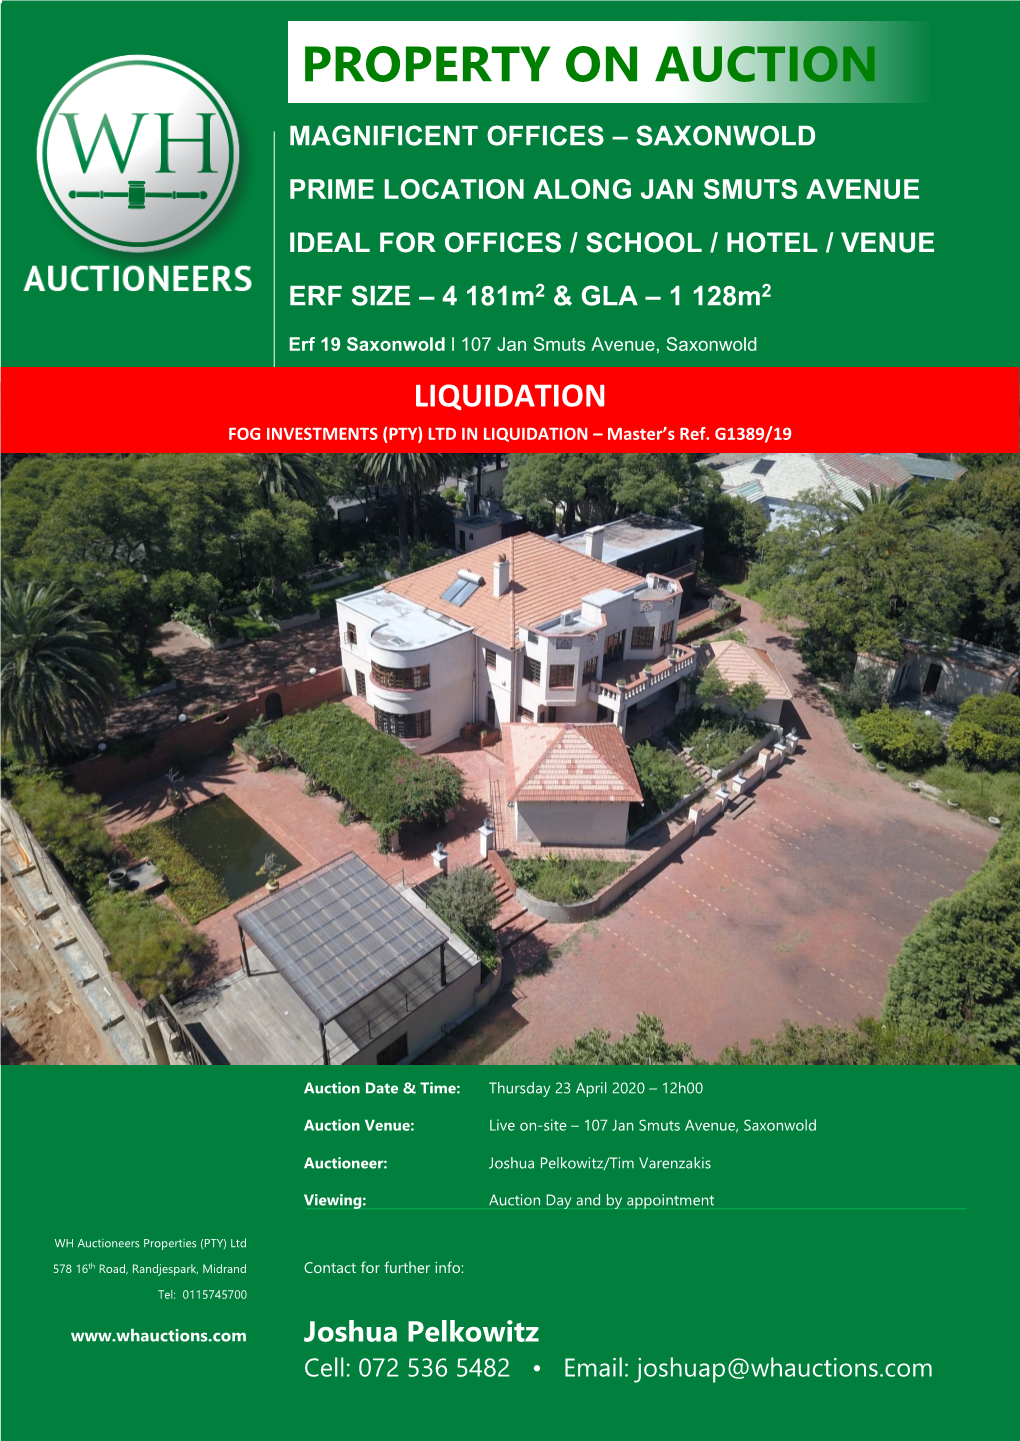 Property on Auction Lenasia Property Auction Magnificent Offices – Saxonwold Prime Location Along Jan Smuts Avenue Ideal for Offices / School / Hotel / Venue